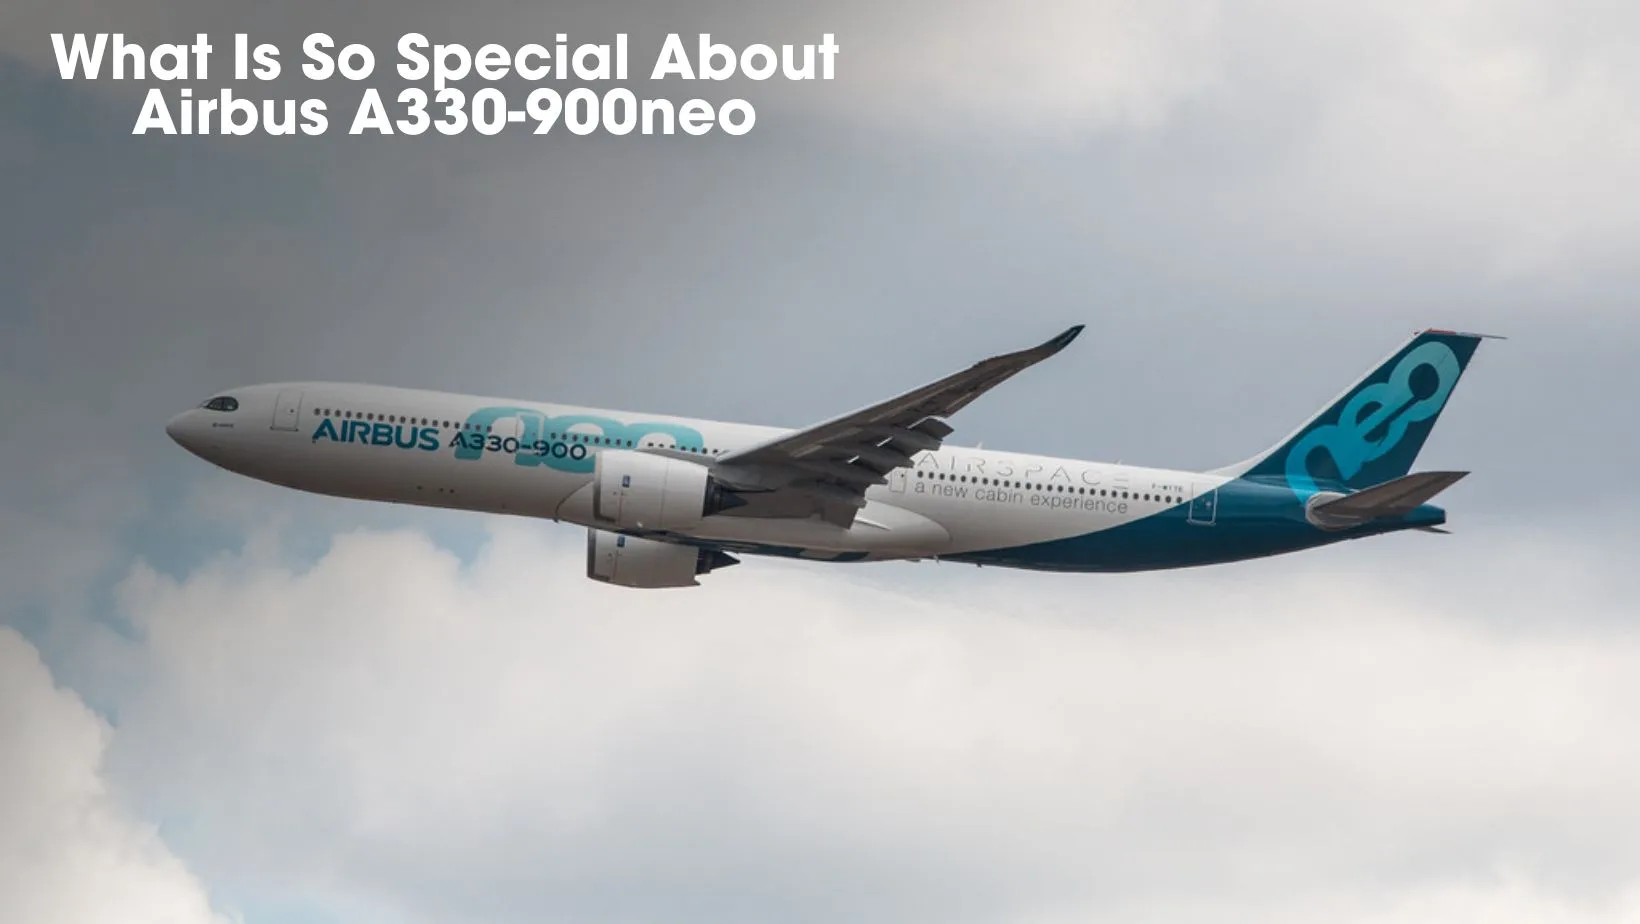 What Is So Special About Airbus A330-900neo